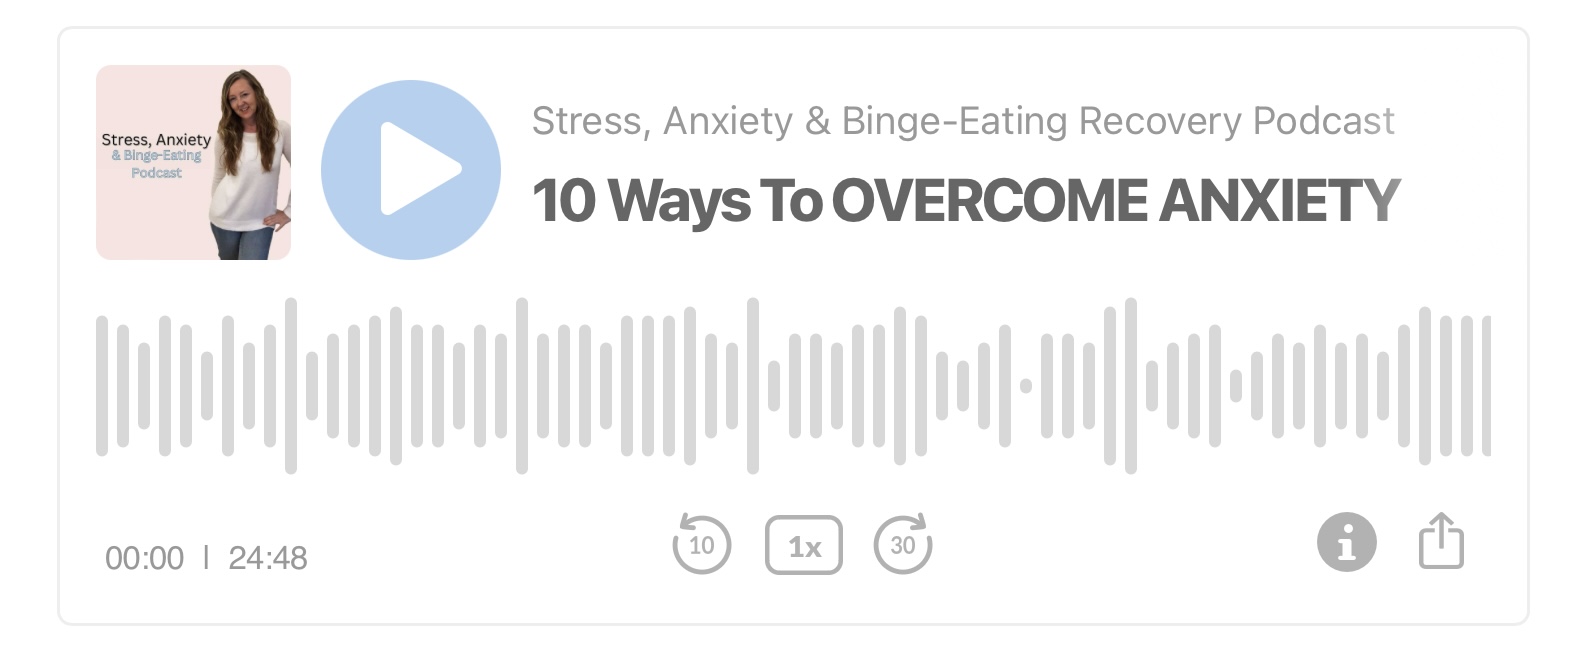 10 ways to overcome anxiety